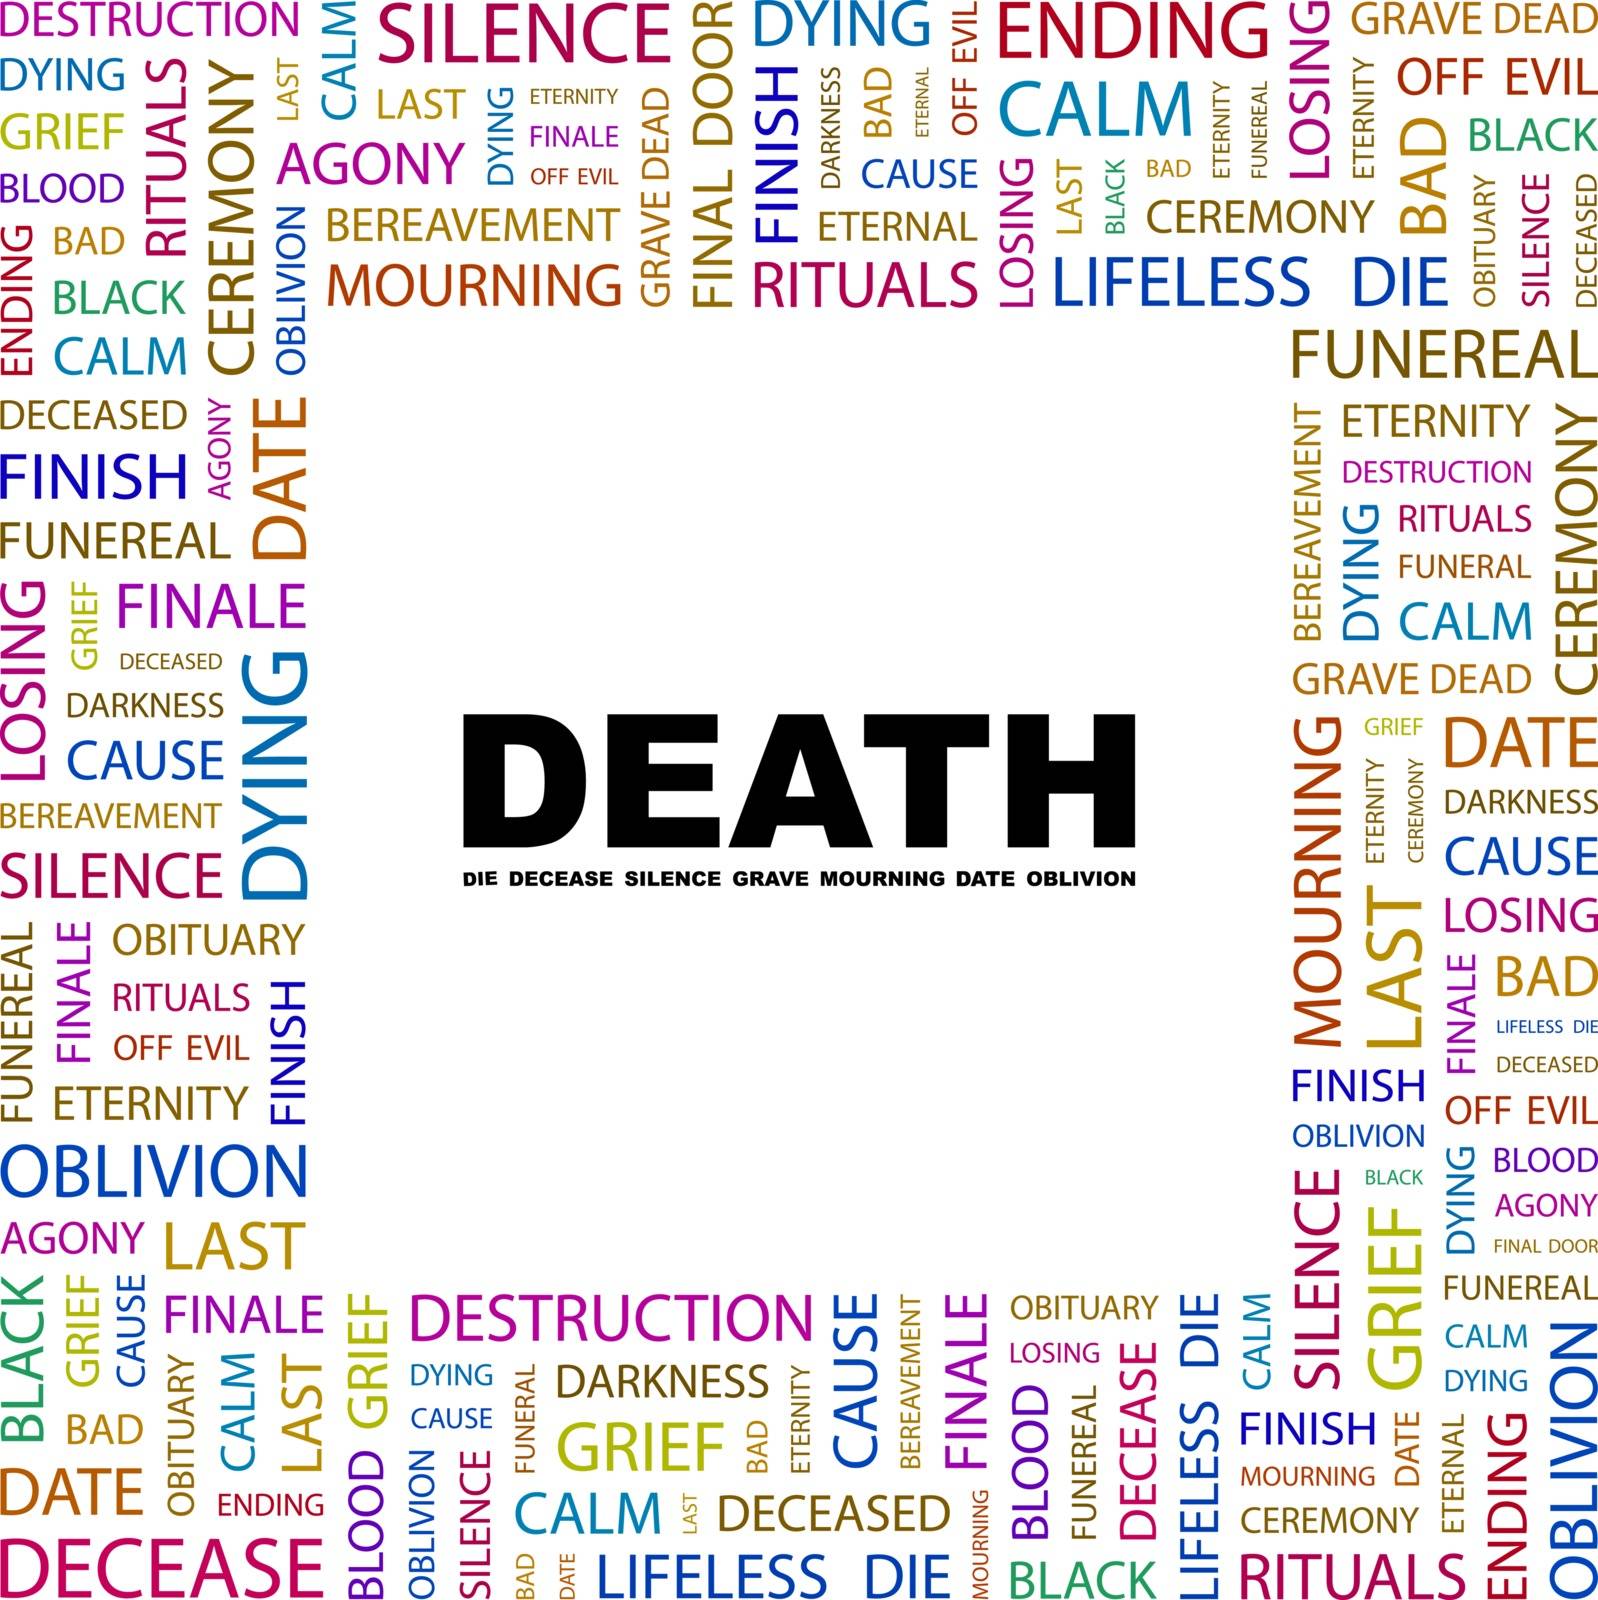 DEATH. Concept illustration. Graphic tag collection. Wordcloud collage.